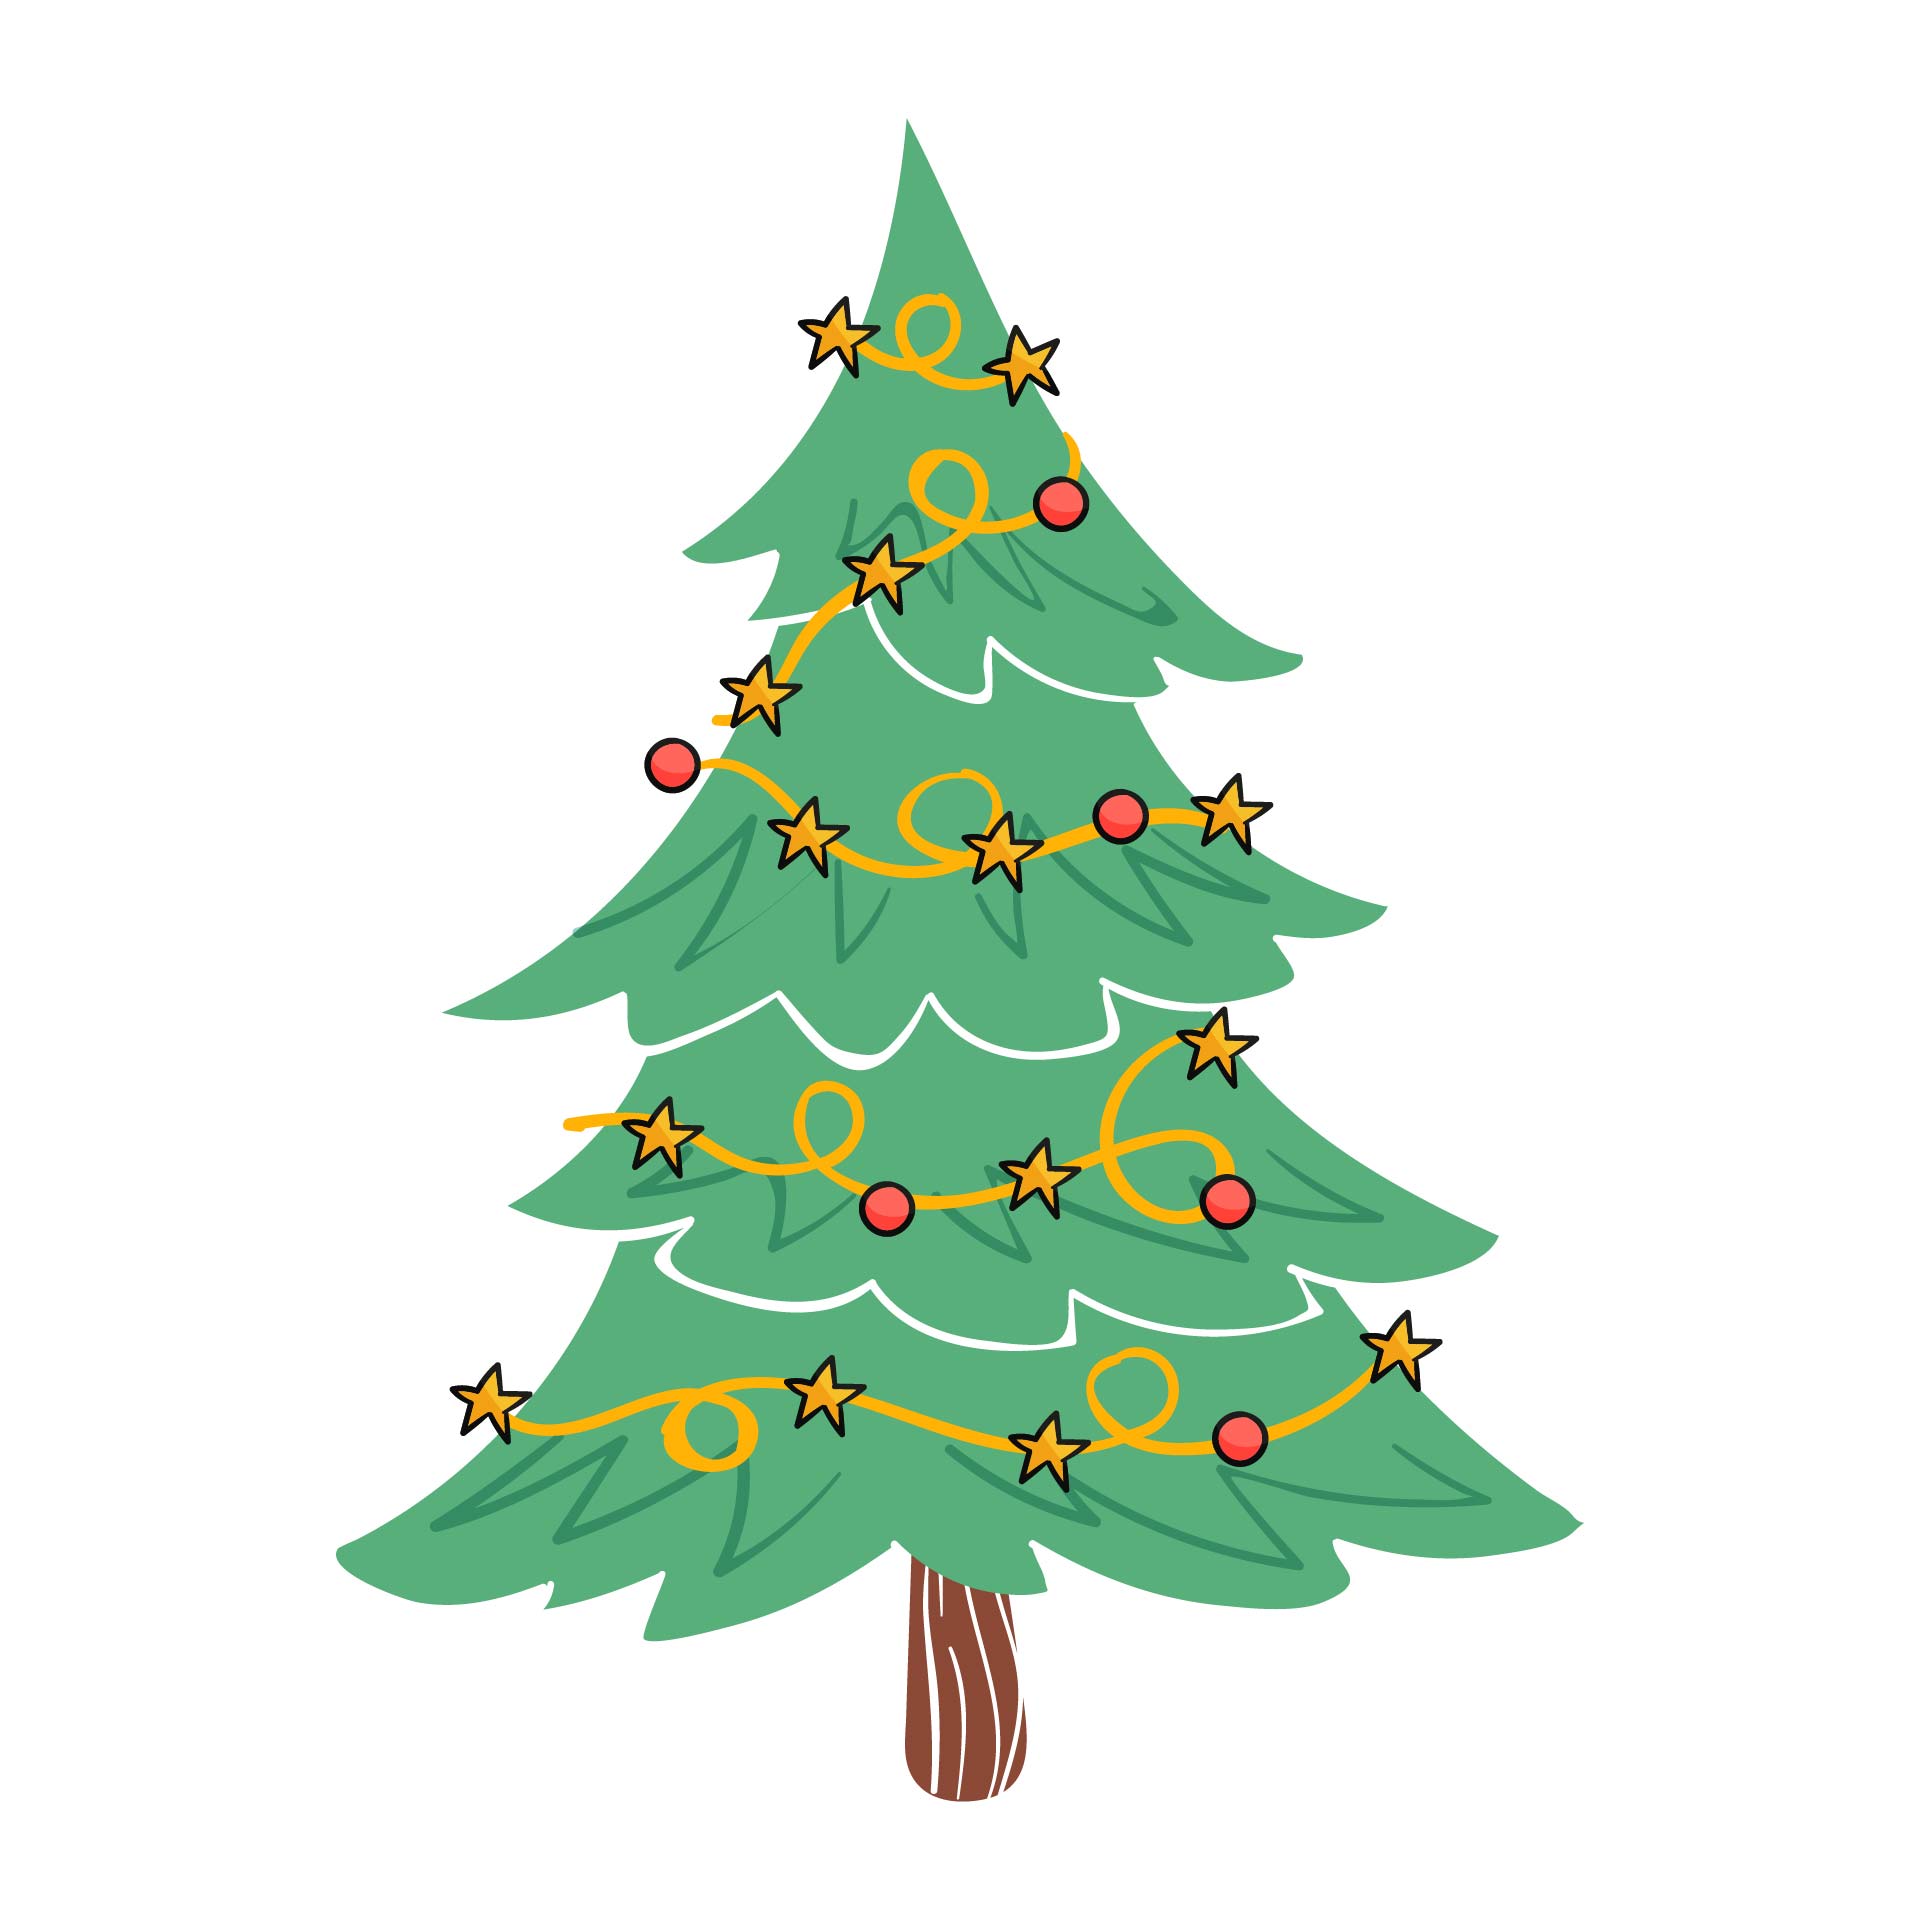 Winter And Christmas Ornaments Vector